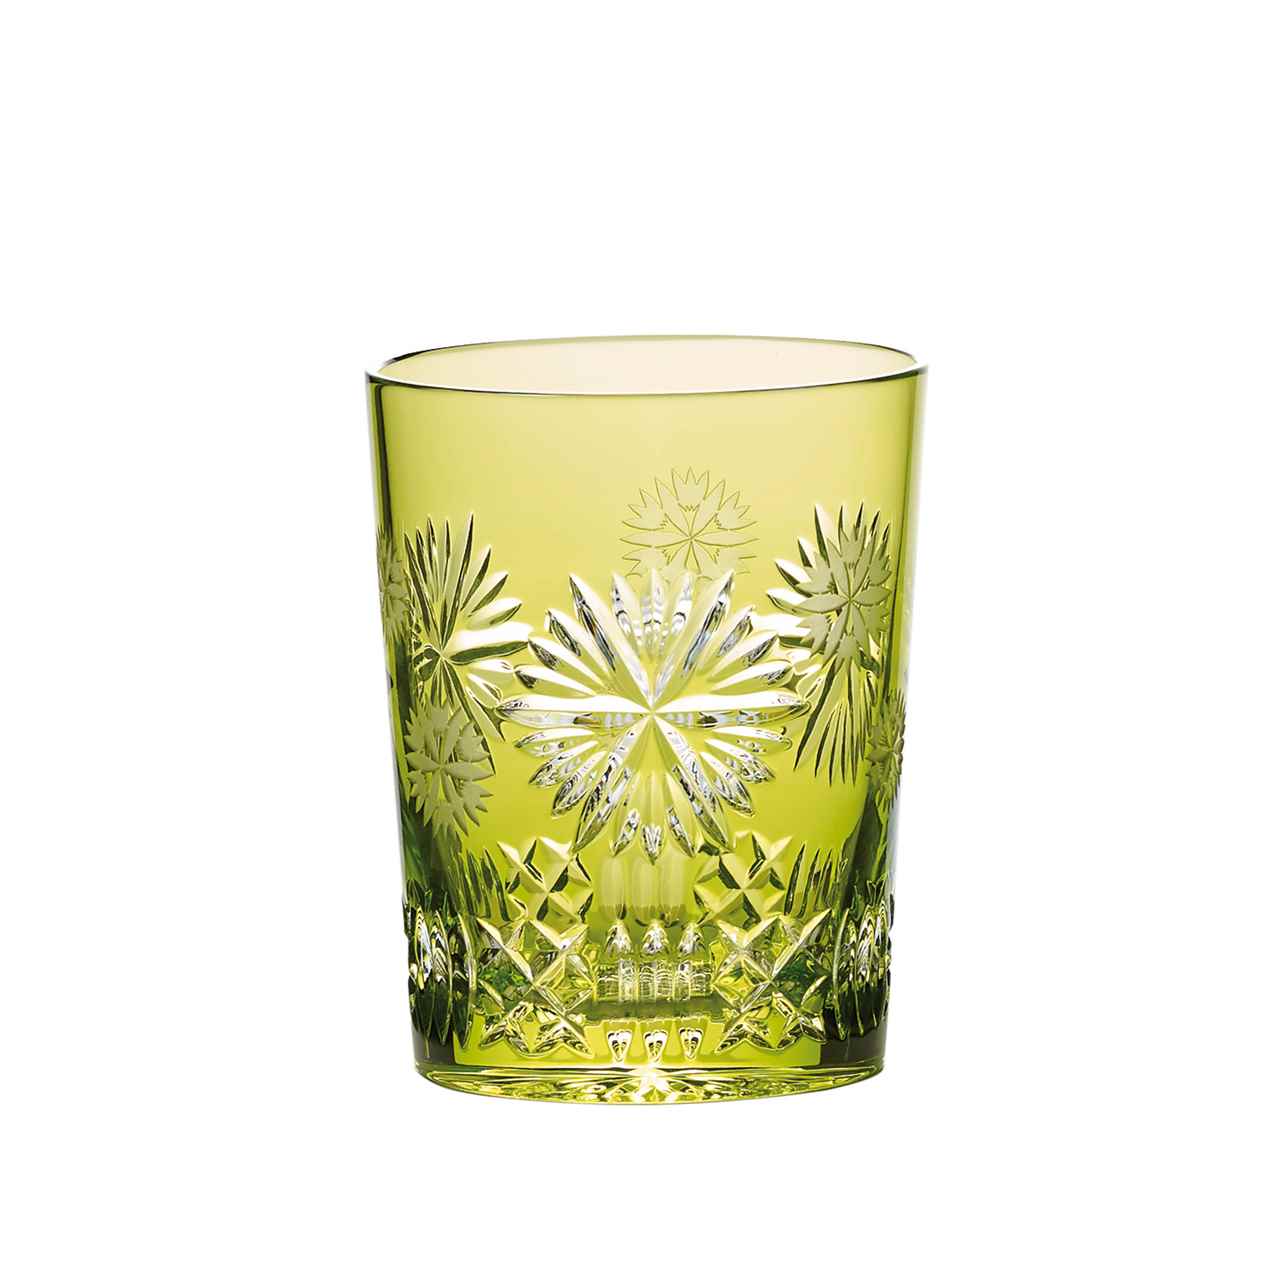  2019 Snowflake Wishes Prosperity Prestige Edition Double Old Fashioned Lime Tumbler 